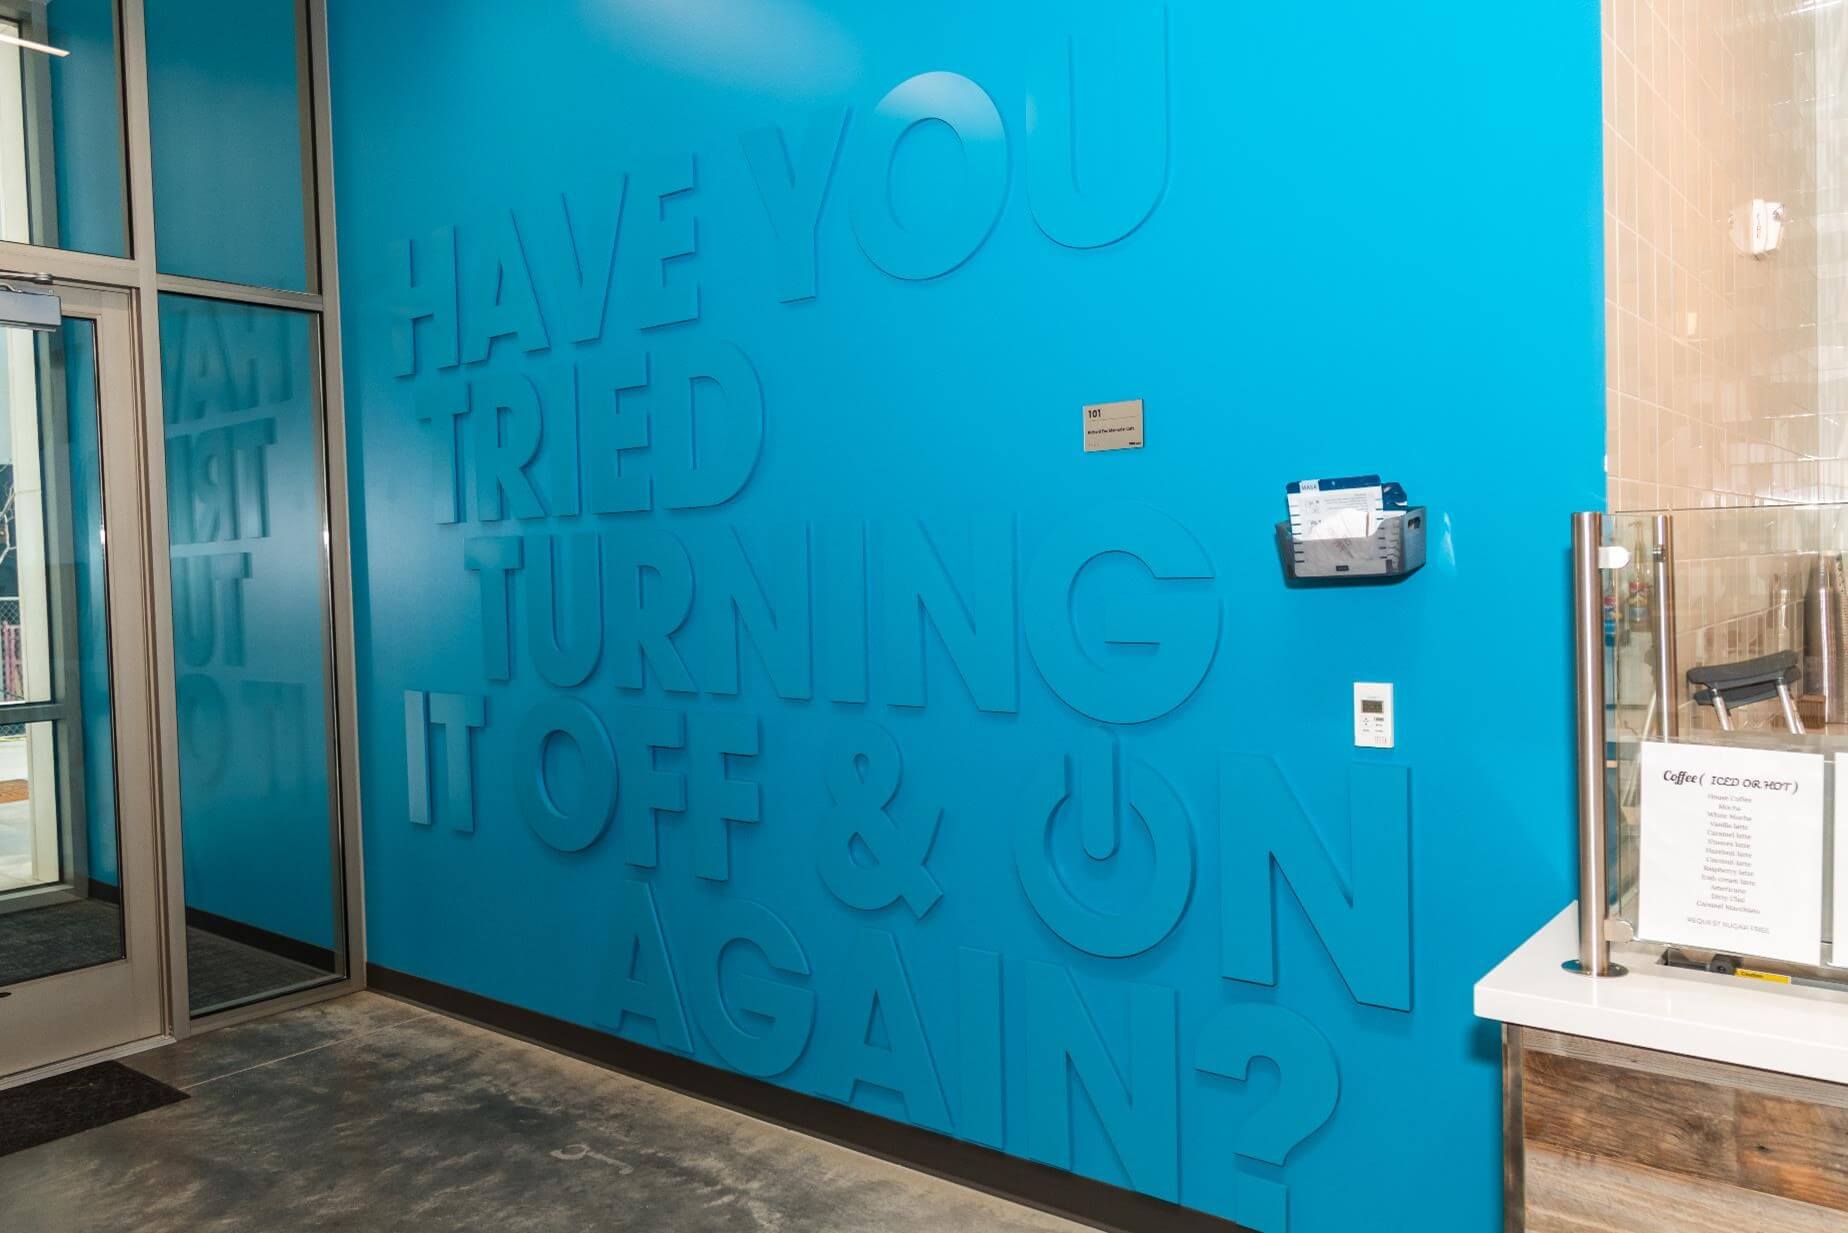 Wall of the PDQ cafeteria which has 'Have you tried turning it off and on again?' lettered on it in large, bold letters